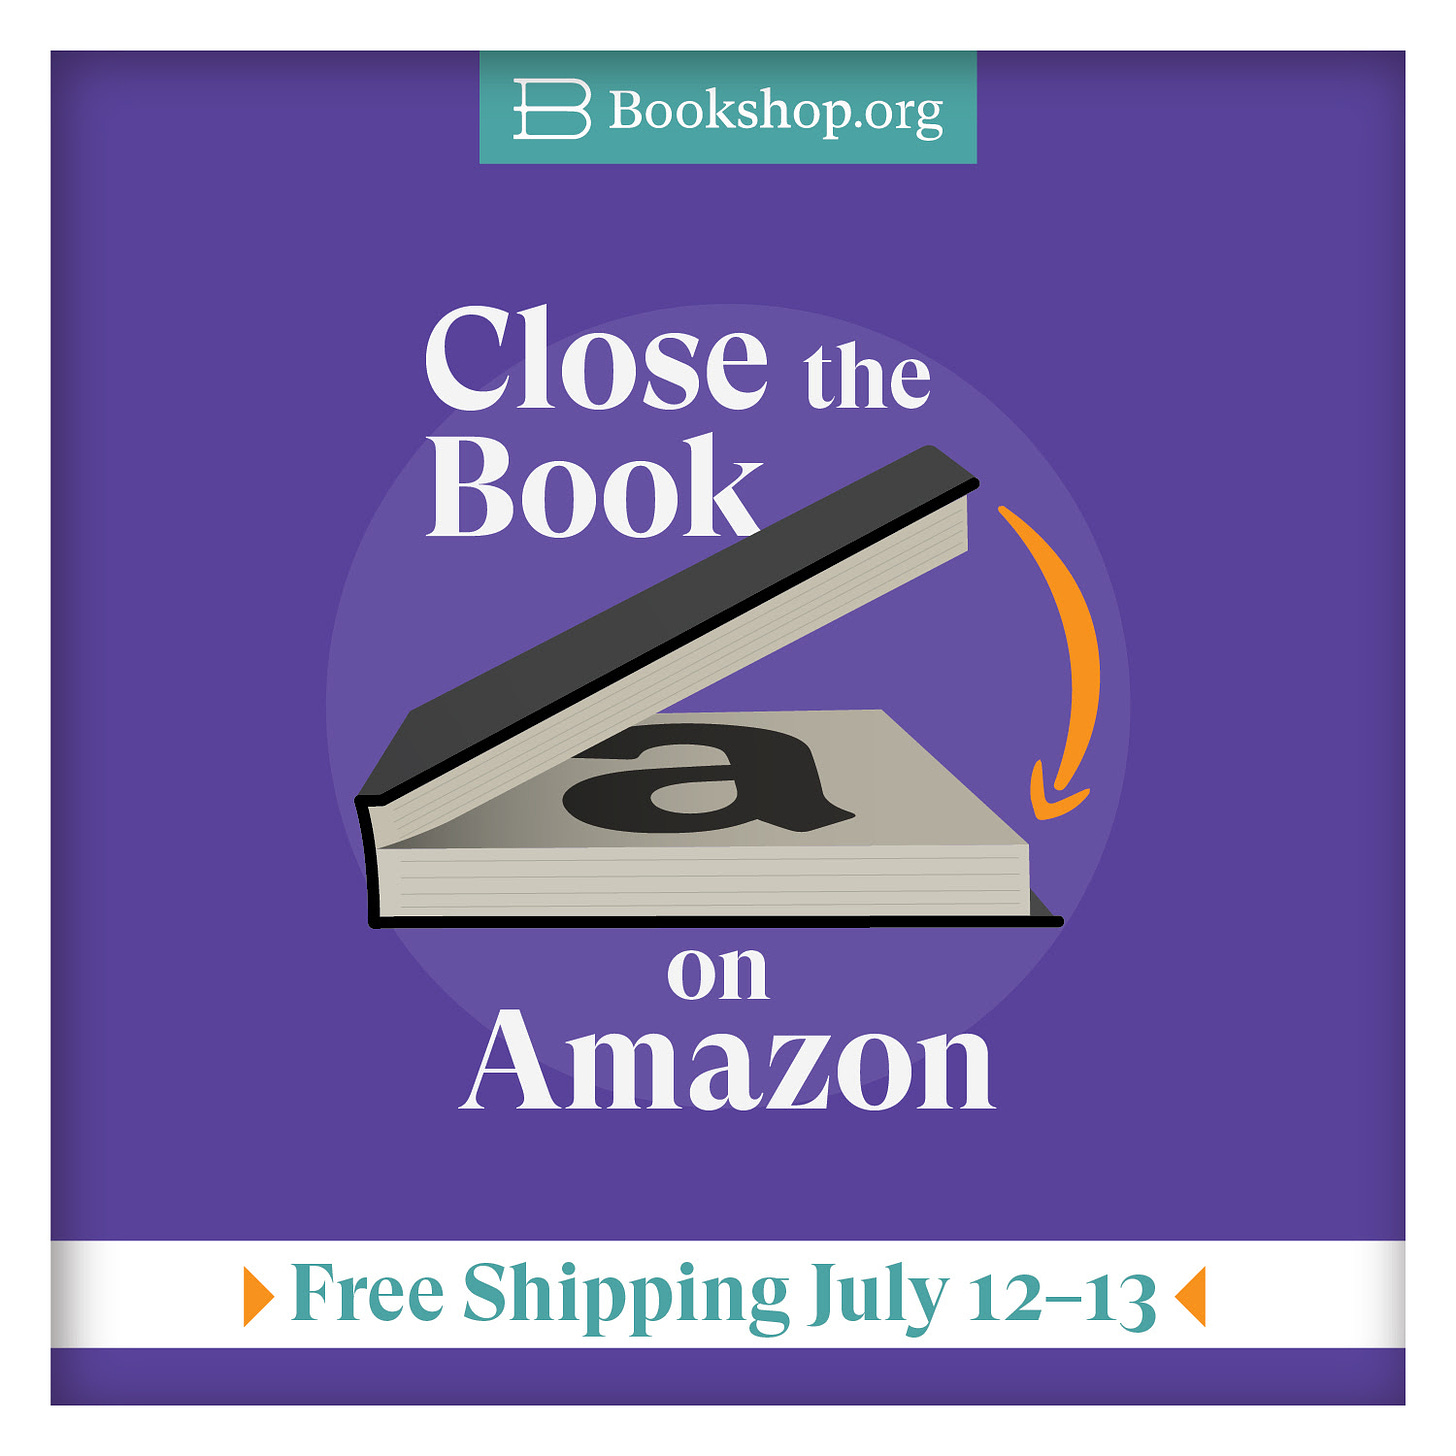 Graphic for Bookshop.org that says "Close the book on Amazon: free shipping July 12-13"